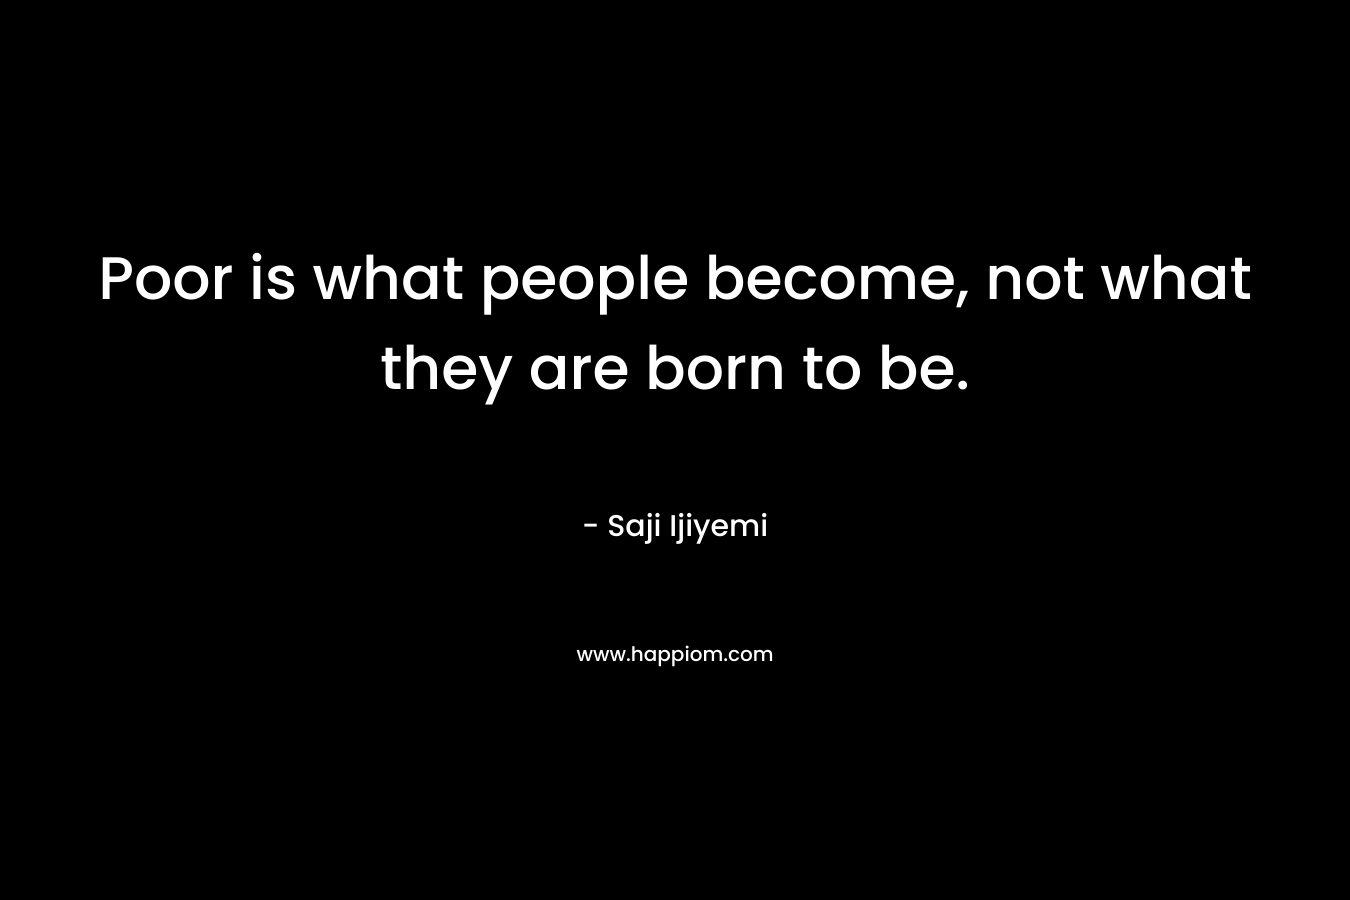 Poor is what people become, not what they are born to be.